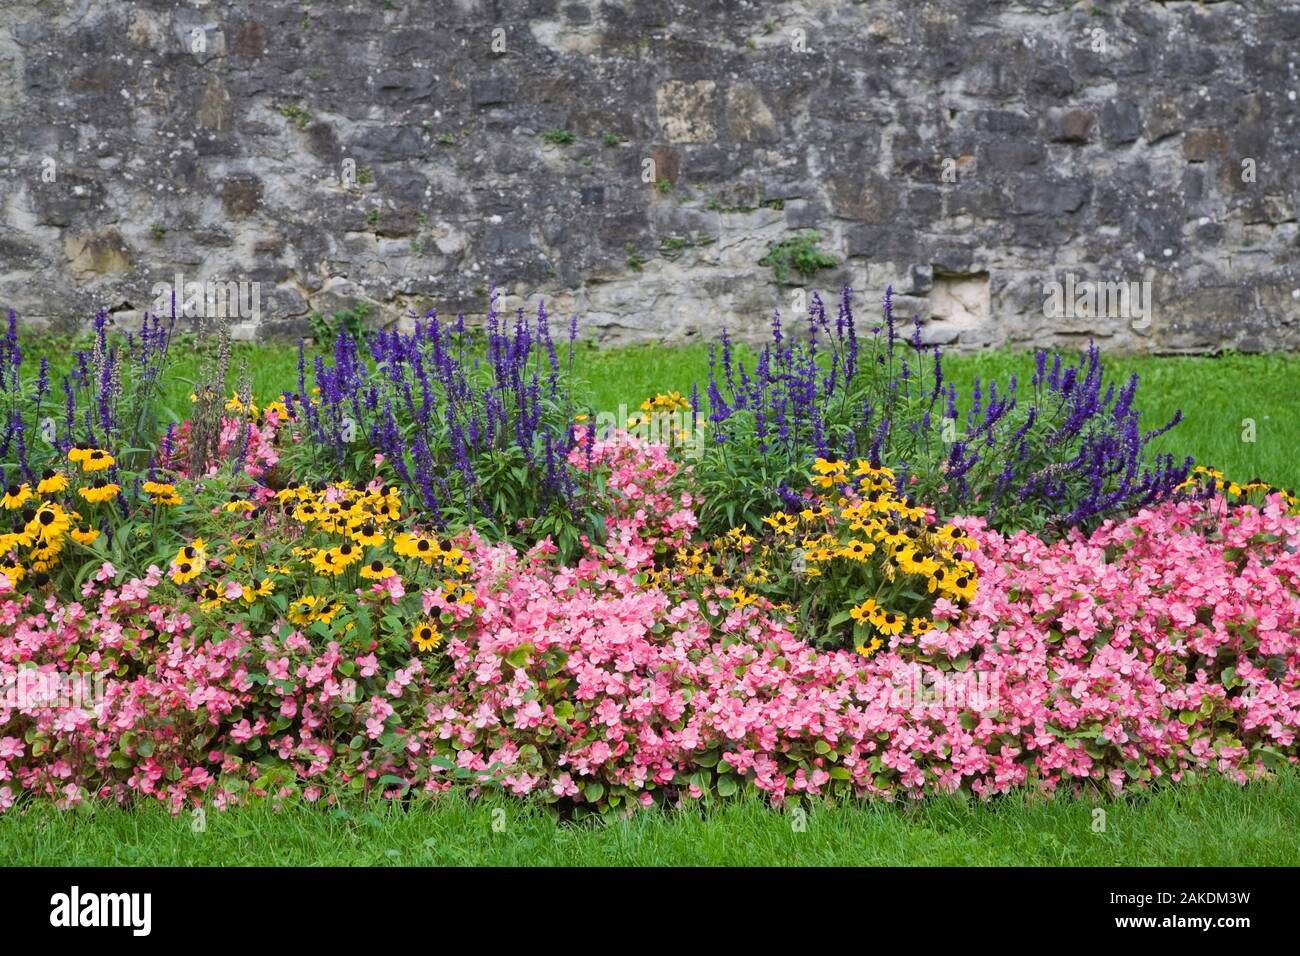 Flower bed in public park planted with pink Begonias, Yellow Rudbeckia - Coneflowers and deep blue Salvia. Stock Photo